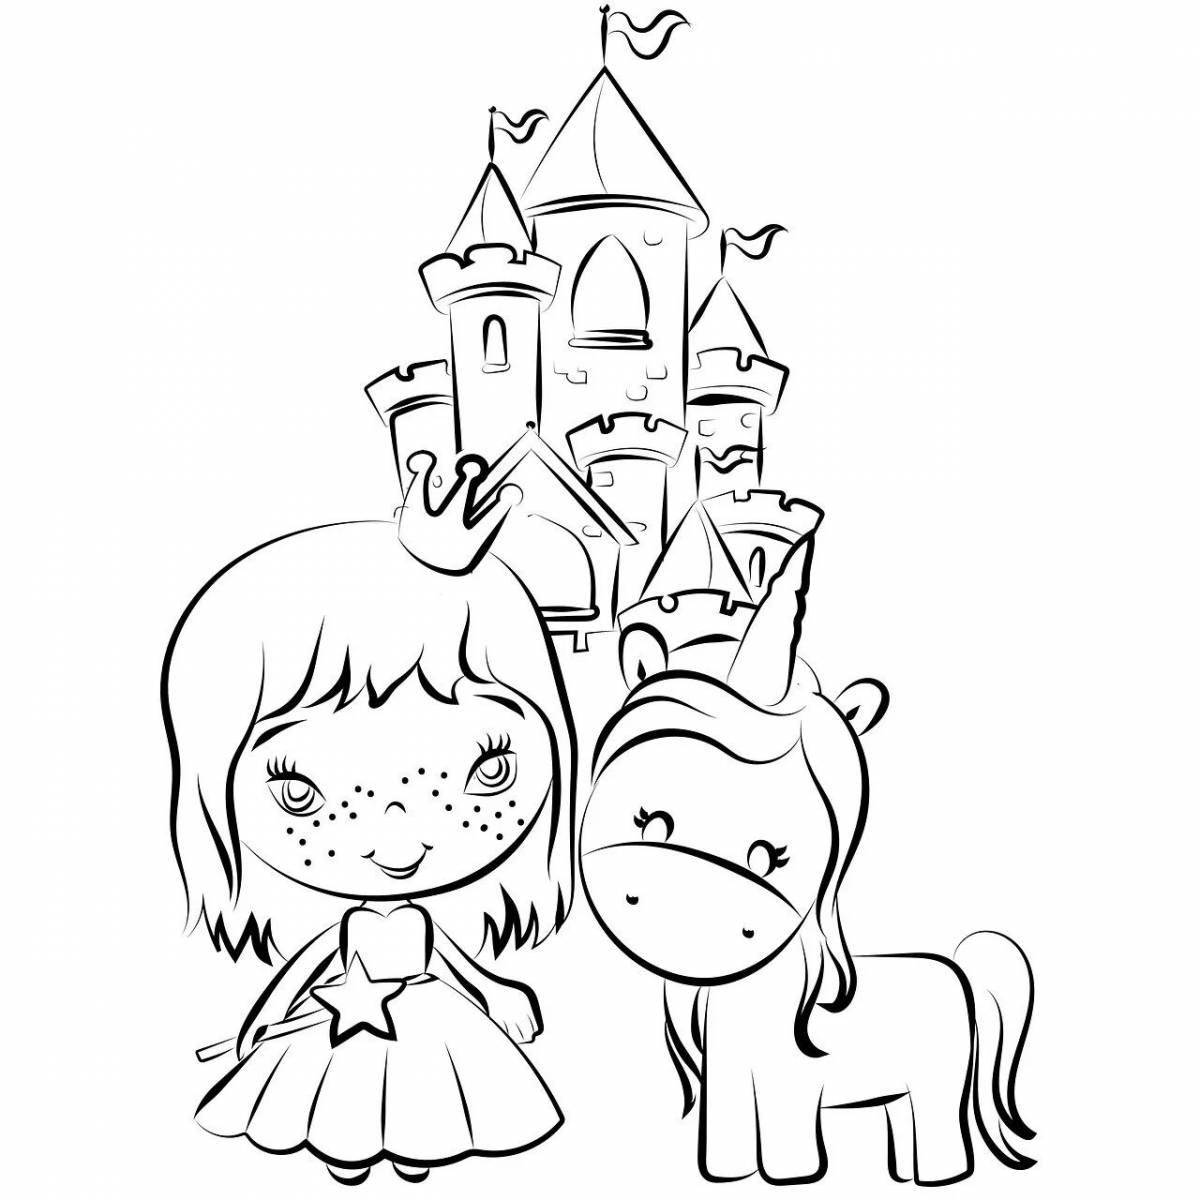 Coloring cute castles for girls